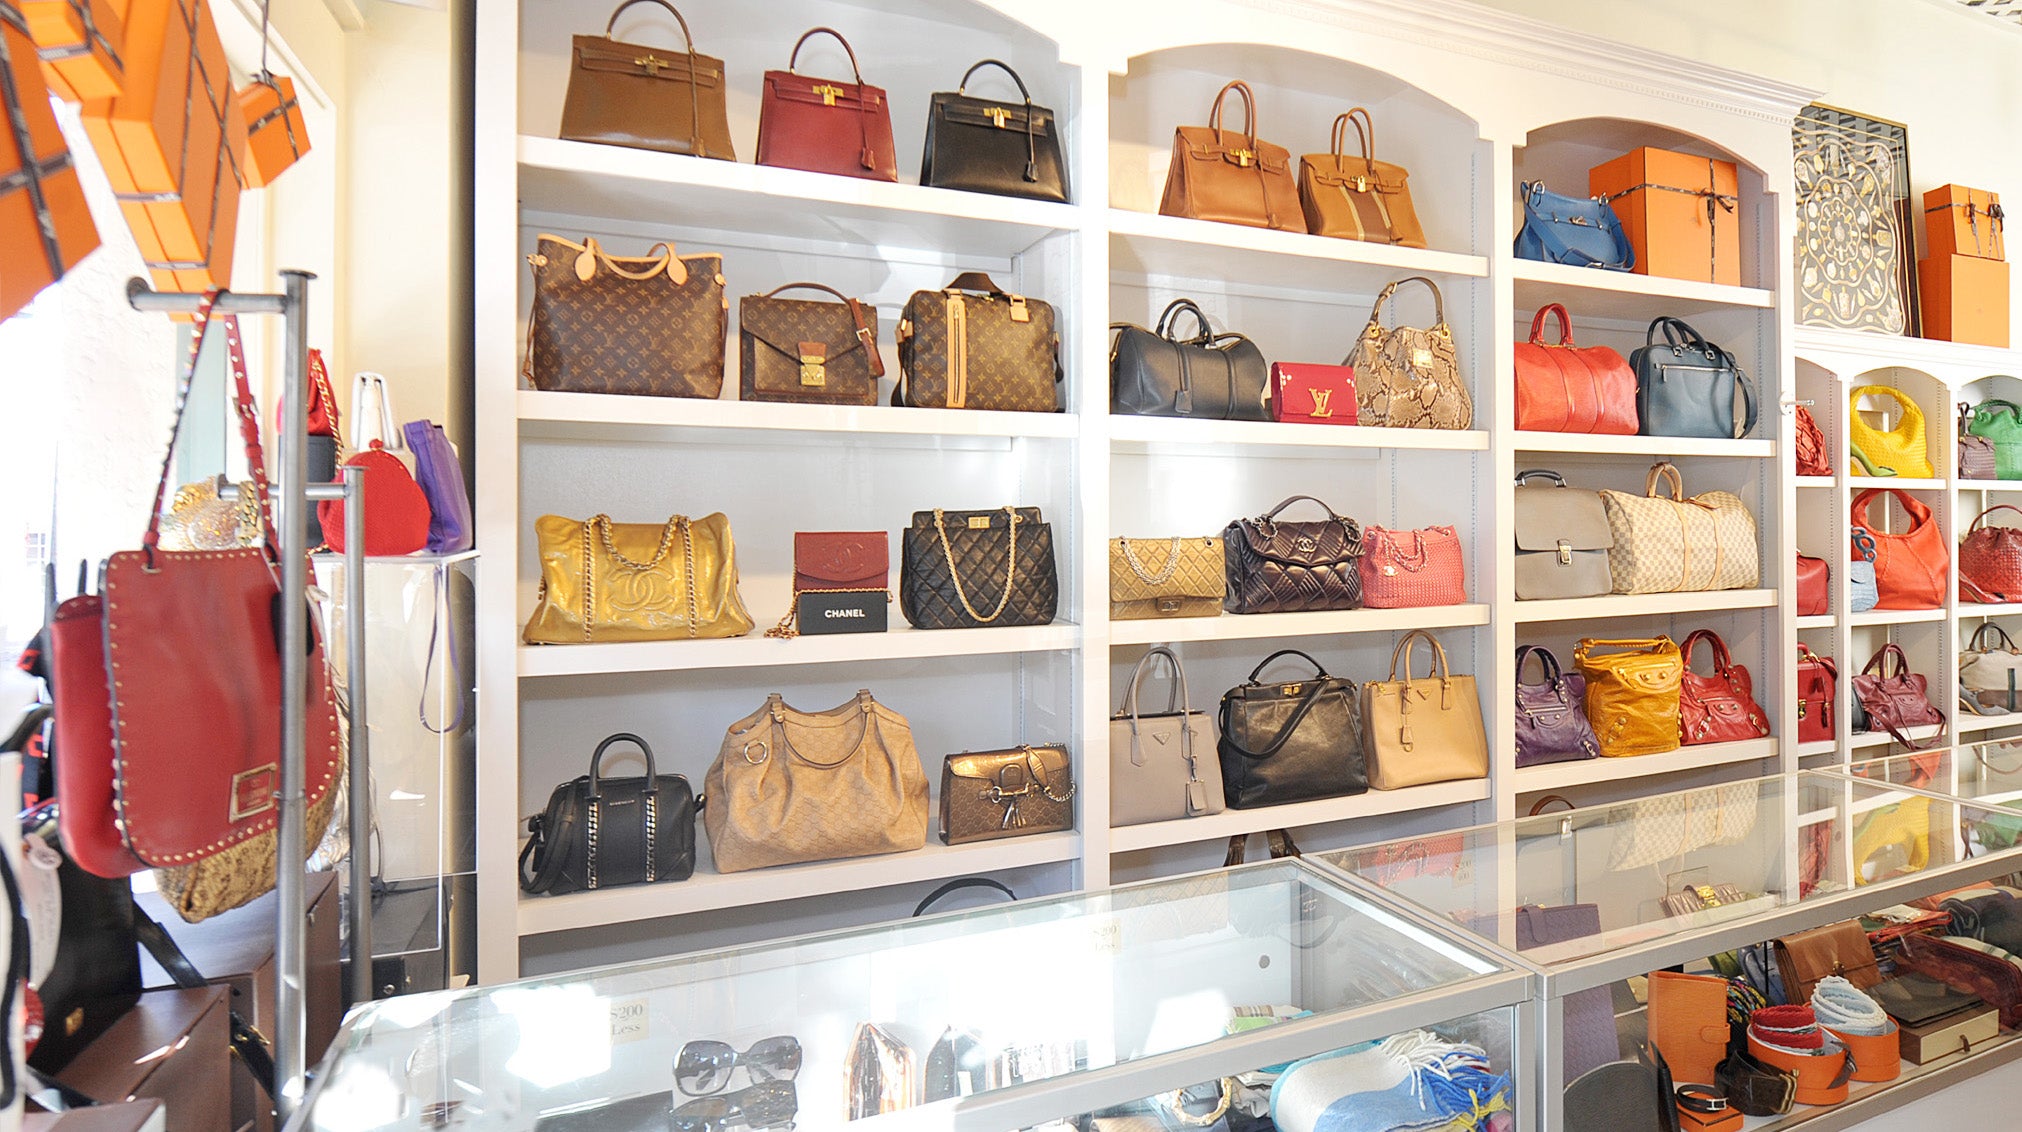 Iriarte Shop – Find the latest collection of artisanal leather handbags